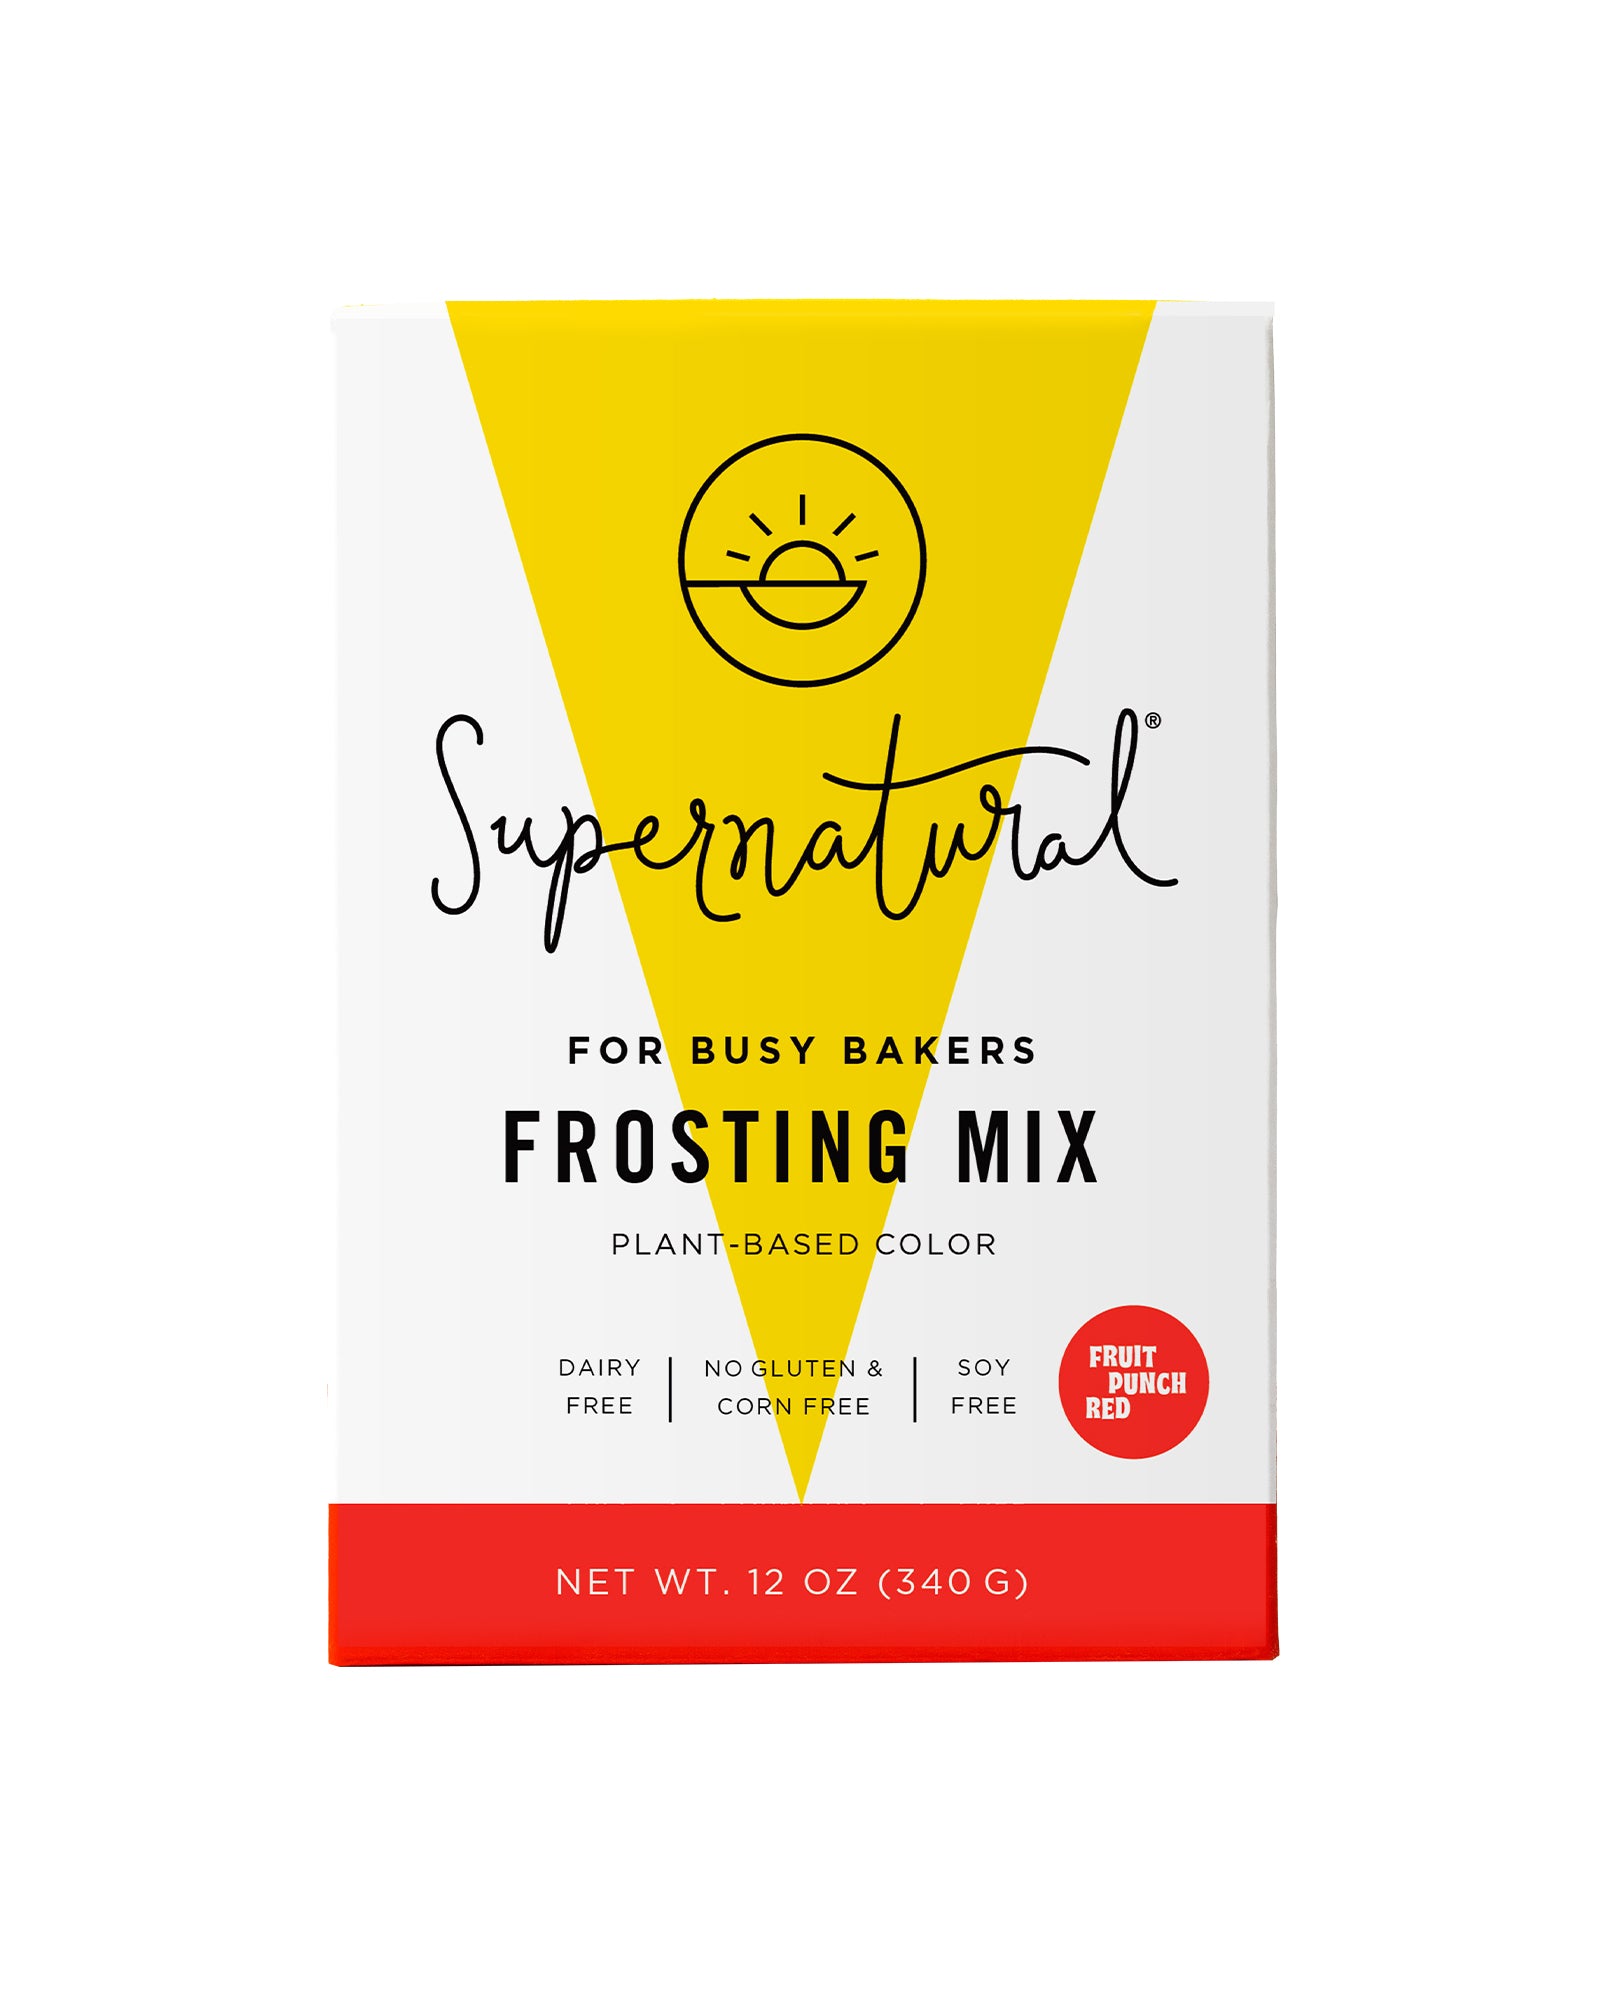 Frosting made with Plant-Based Color